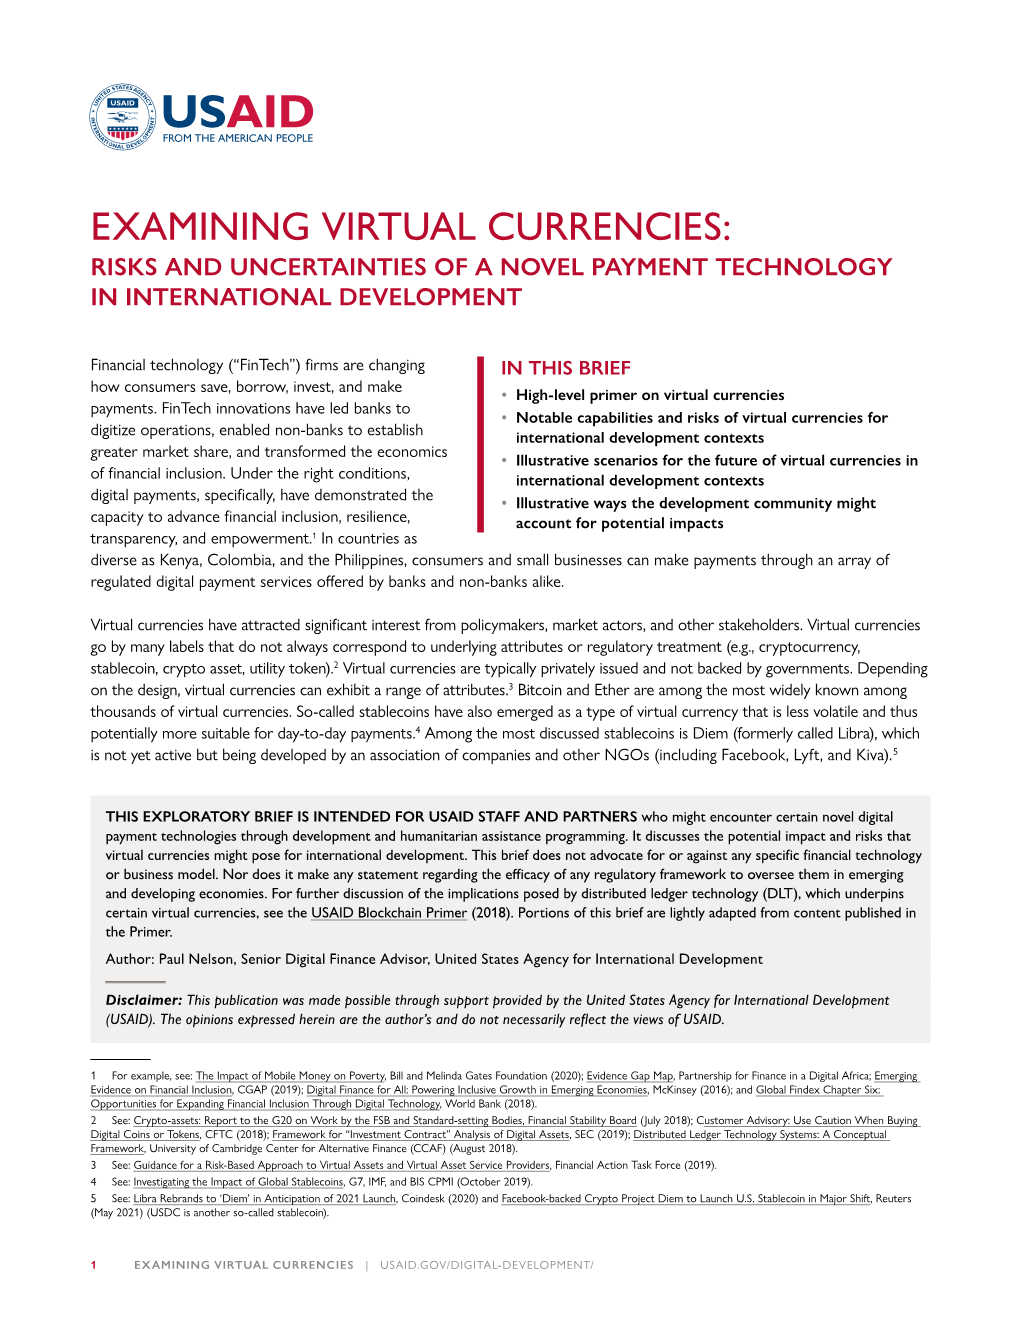 Examining Virtual Currencies: Risks and Uncertainties of a Novel Payment Technology in International Development